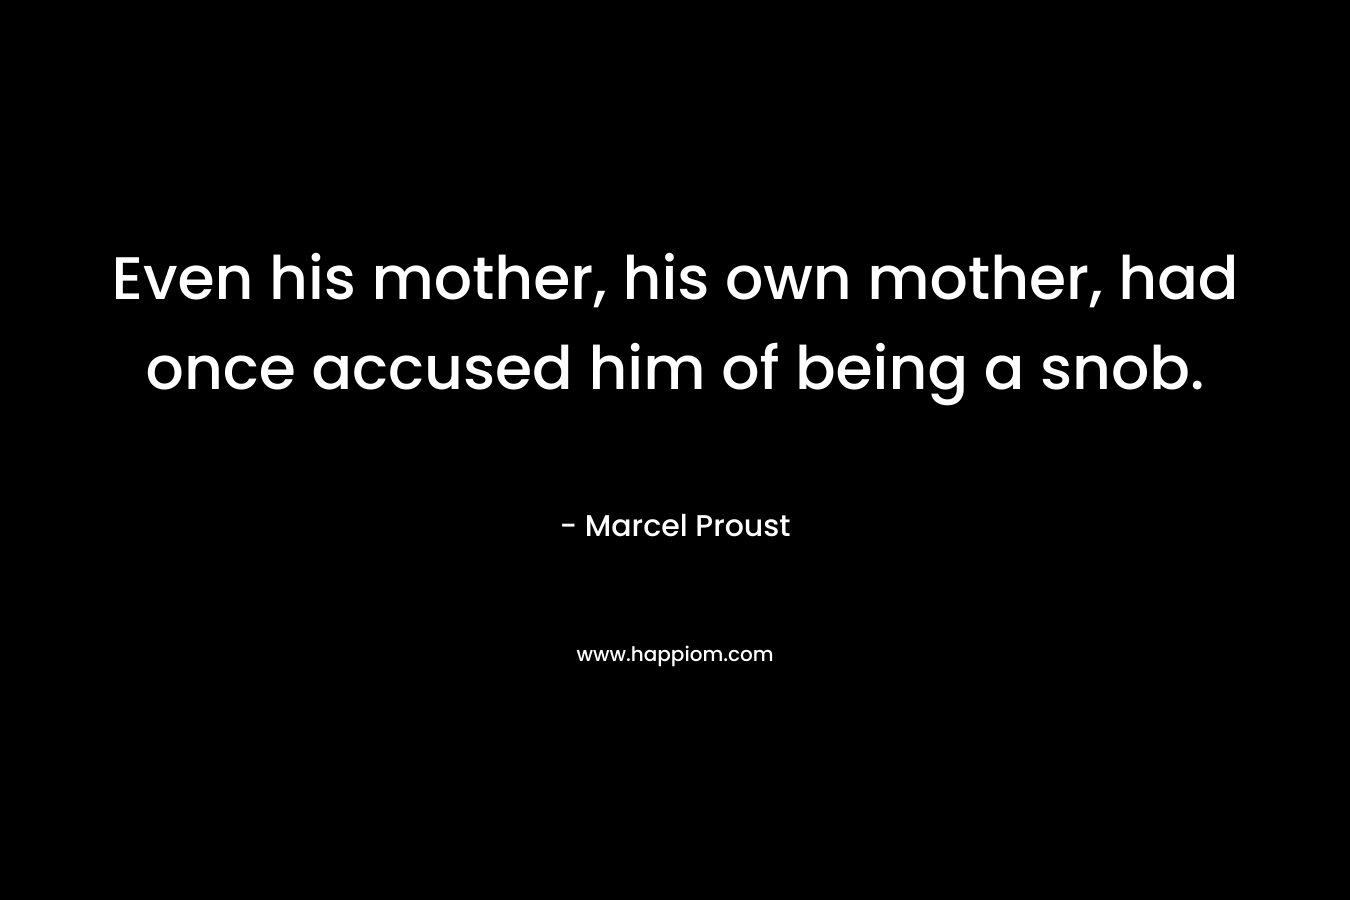 Even his mother, his own mother, had once accused him of being a snob. – Marcel Proust